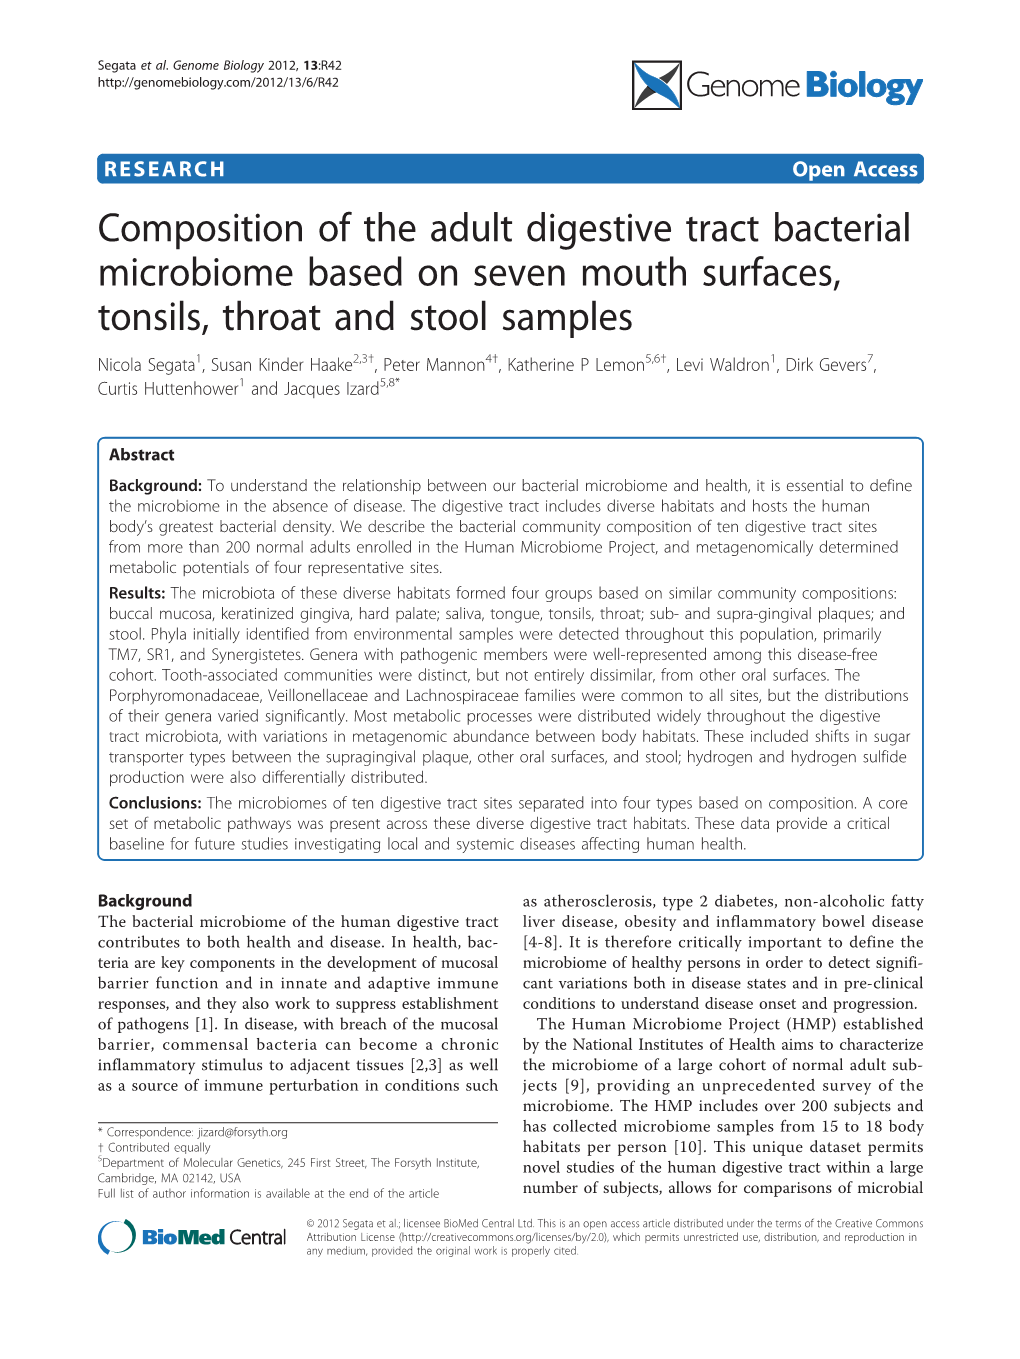 Composition of the Adult Digestive Tract Bacterial Microbiome Based On